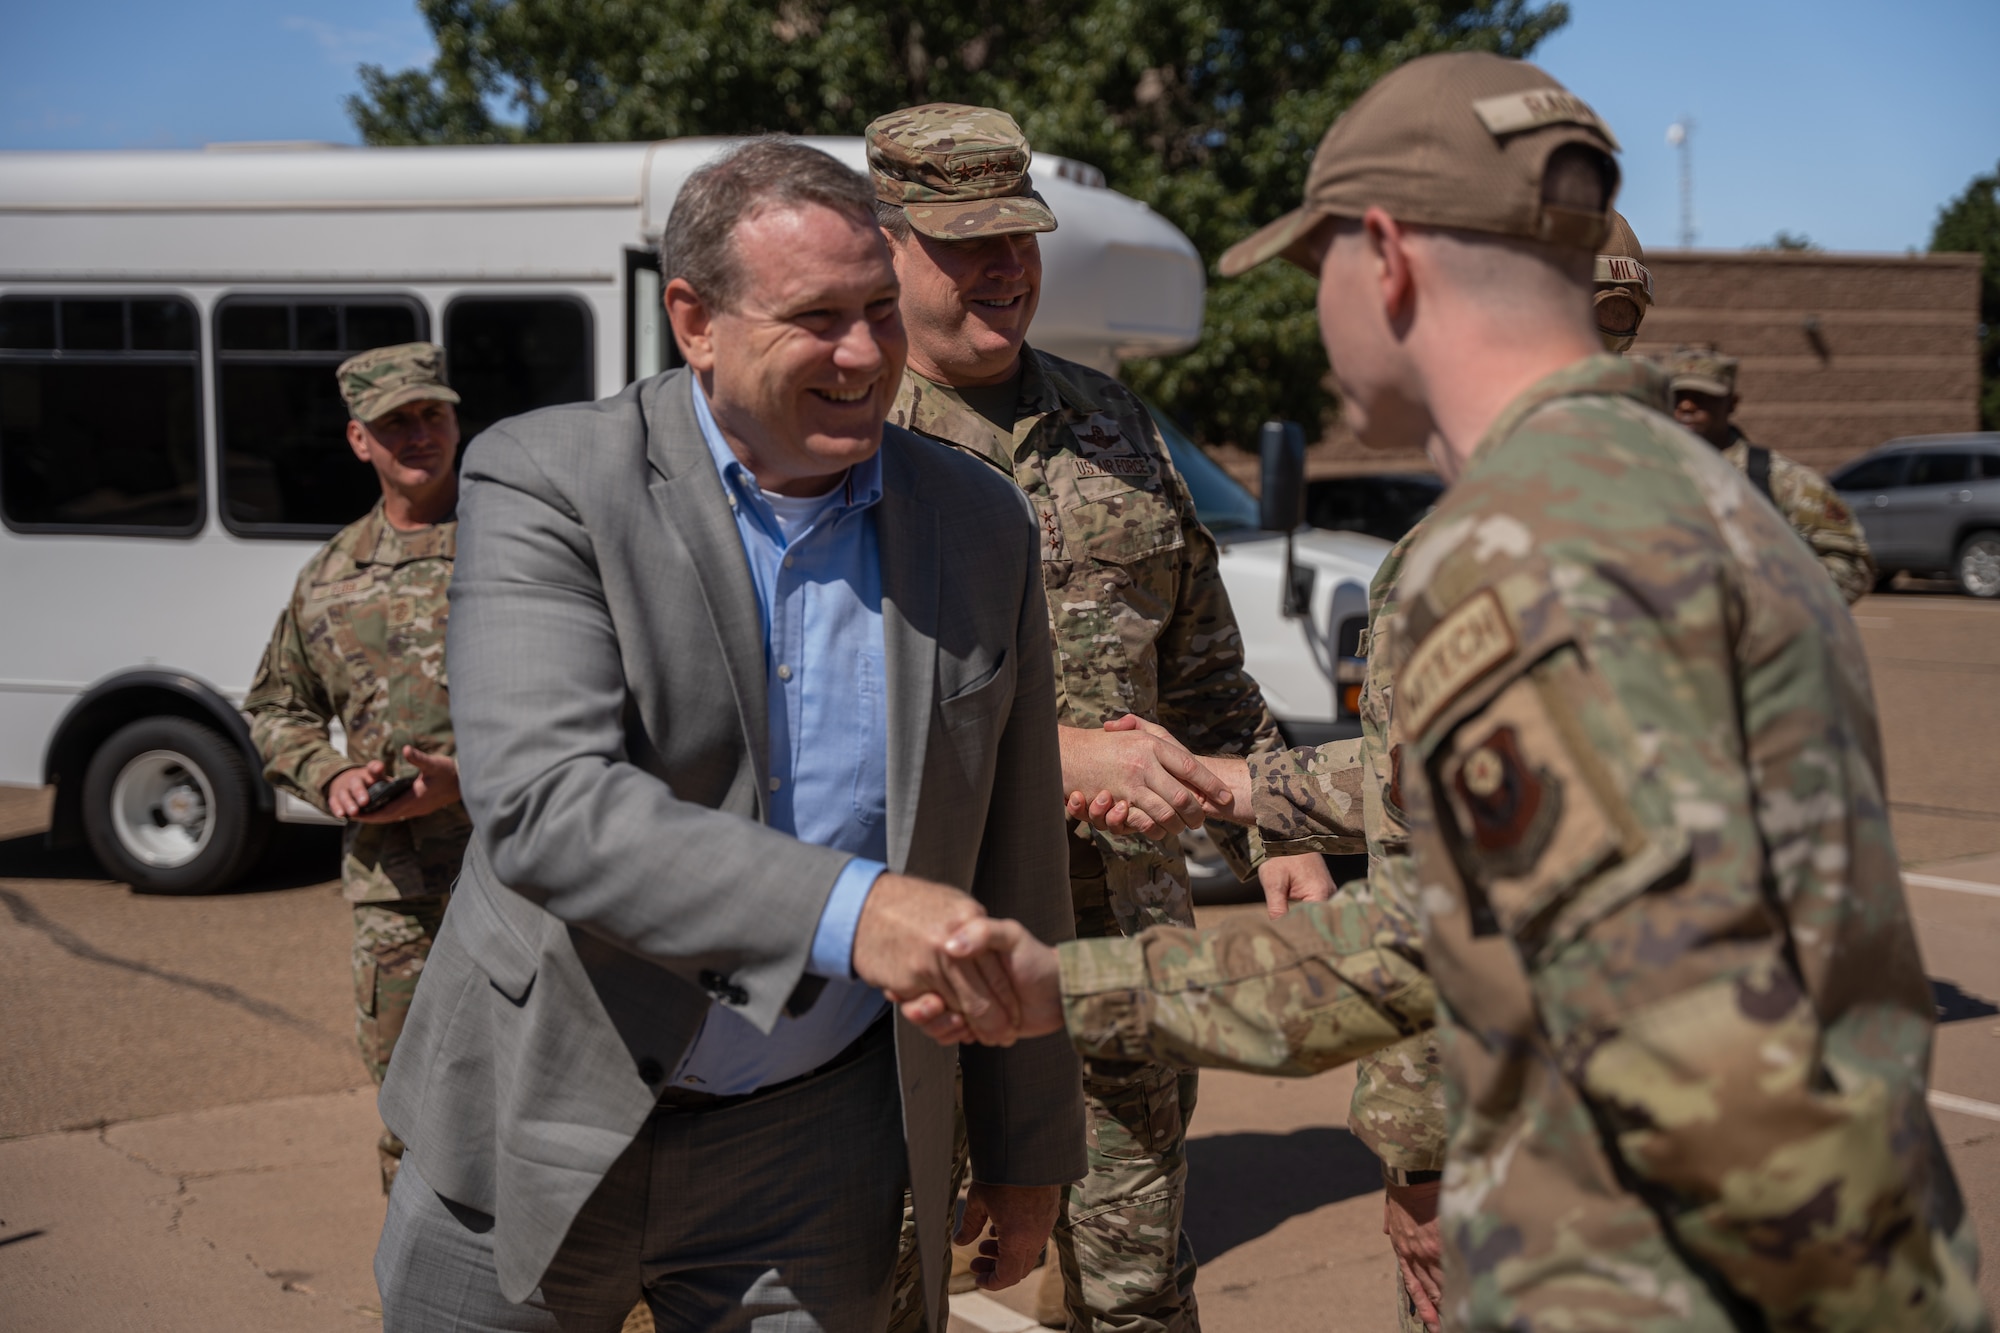 Secretary Andrew Hunter, Assistant Secretary of the Air Force for Acquisition, Technology and Logistics, greets Air Commandos at Cannon AFB, N.M.